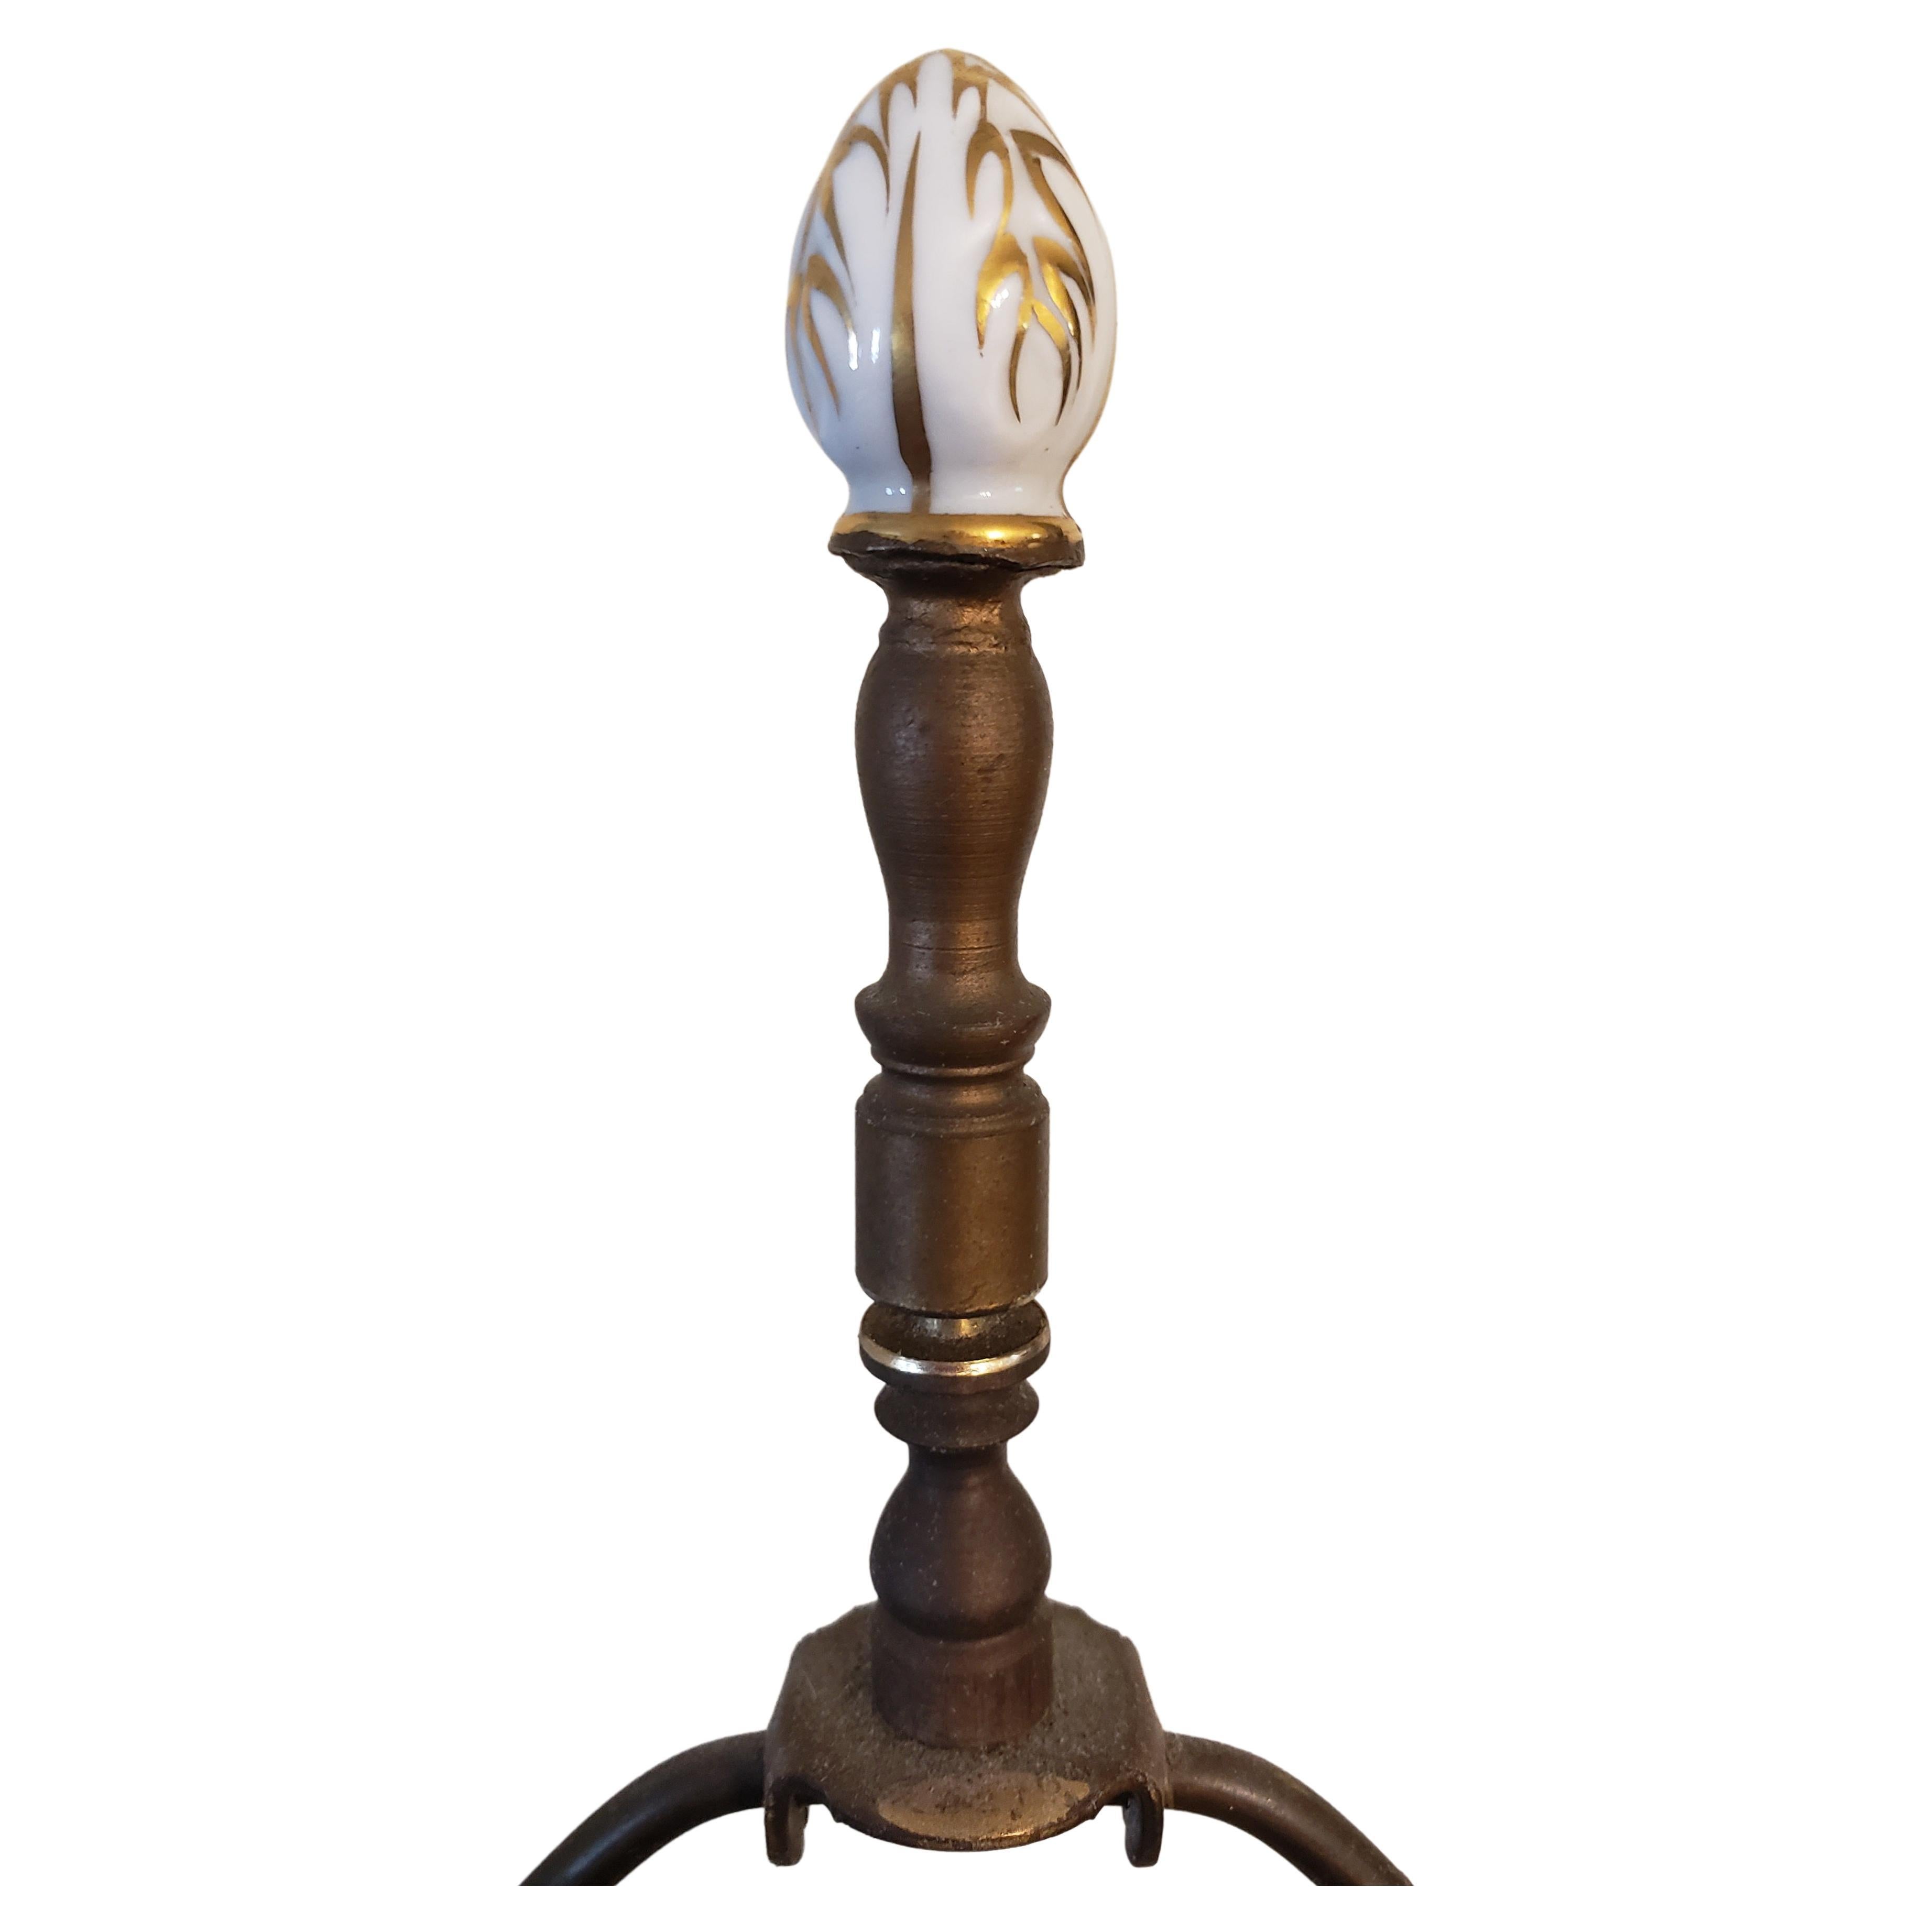 Antique English Porcelain Hand Painted 24K Gold Plated Trophy Lamp, Circa 1920s For Sale 6